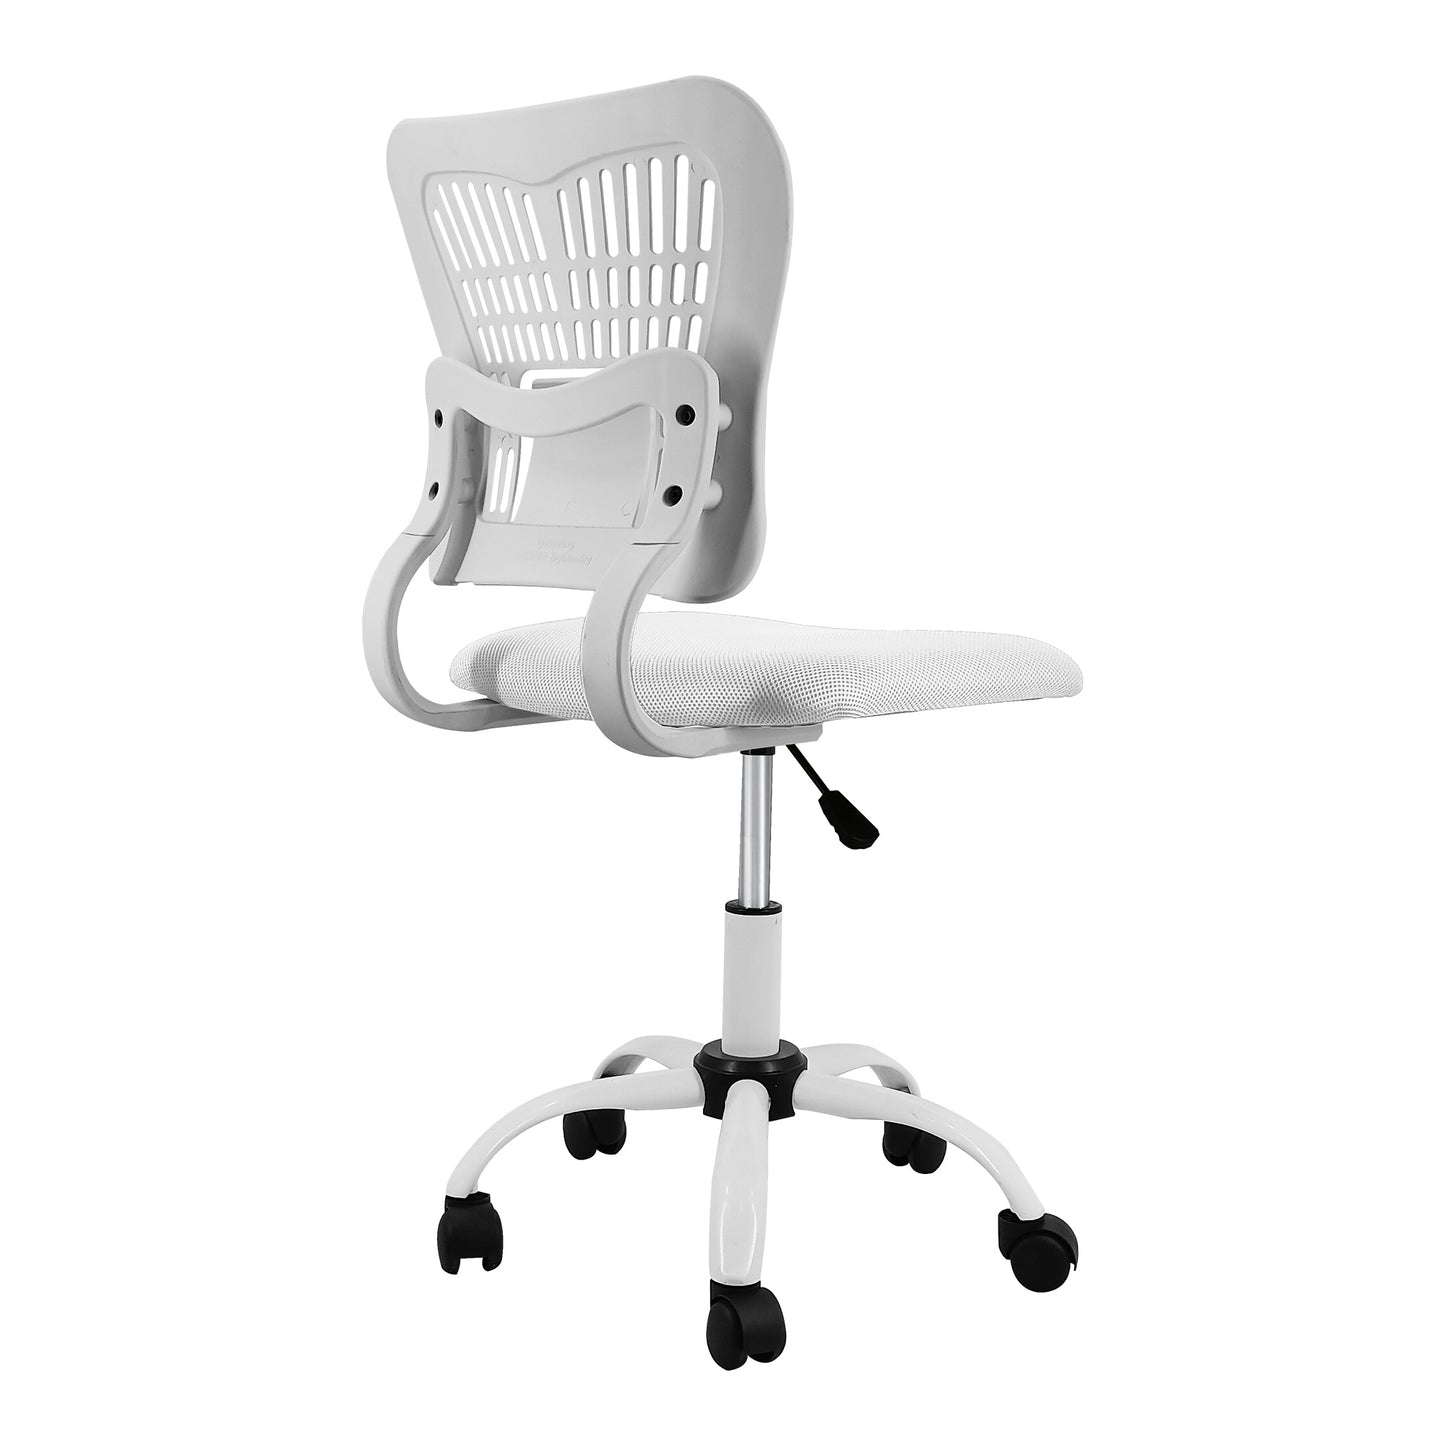 Linson Office Chair